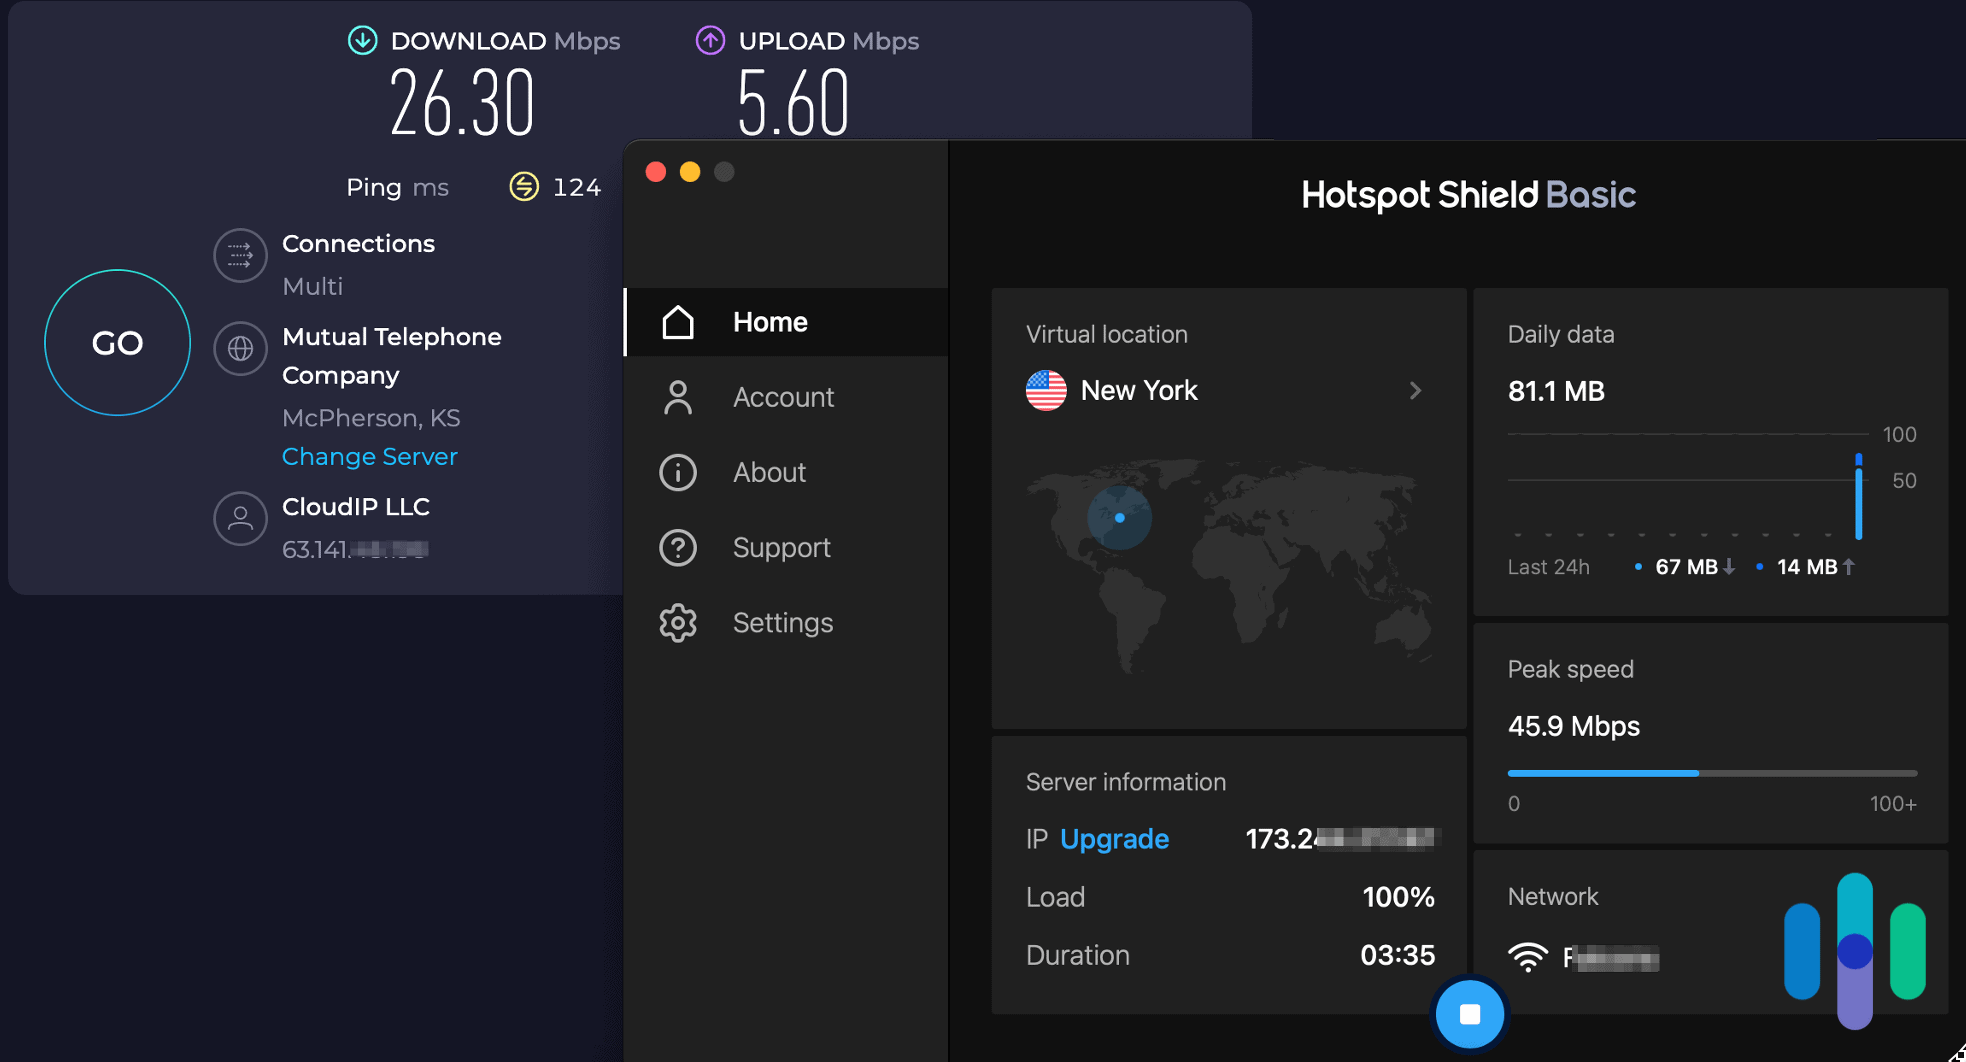 One of our speed tests with Hotspot Shield was a little sluggish.